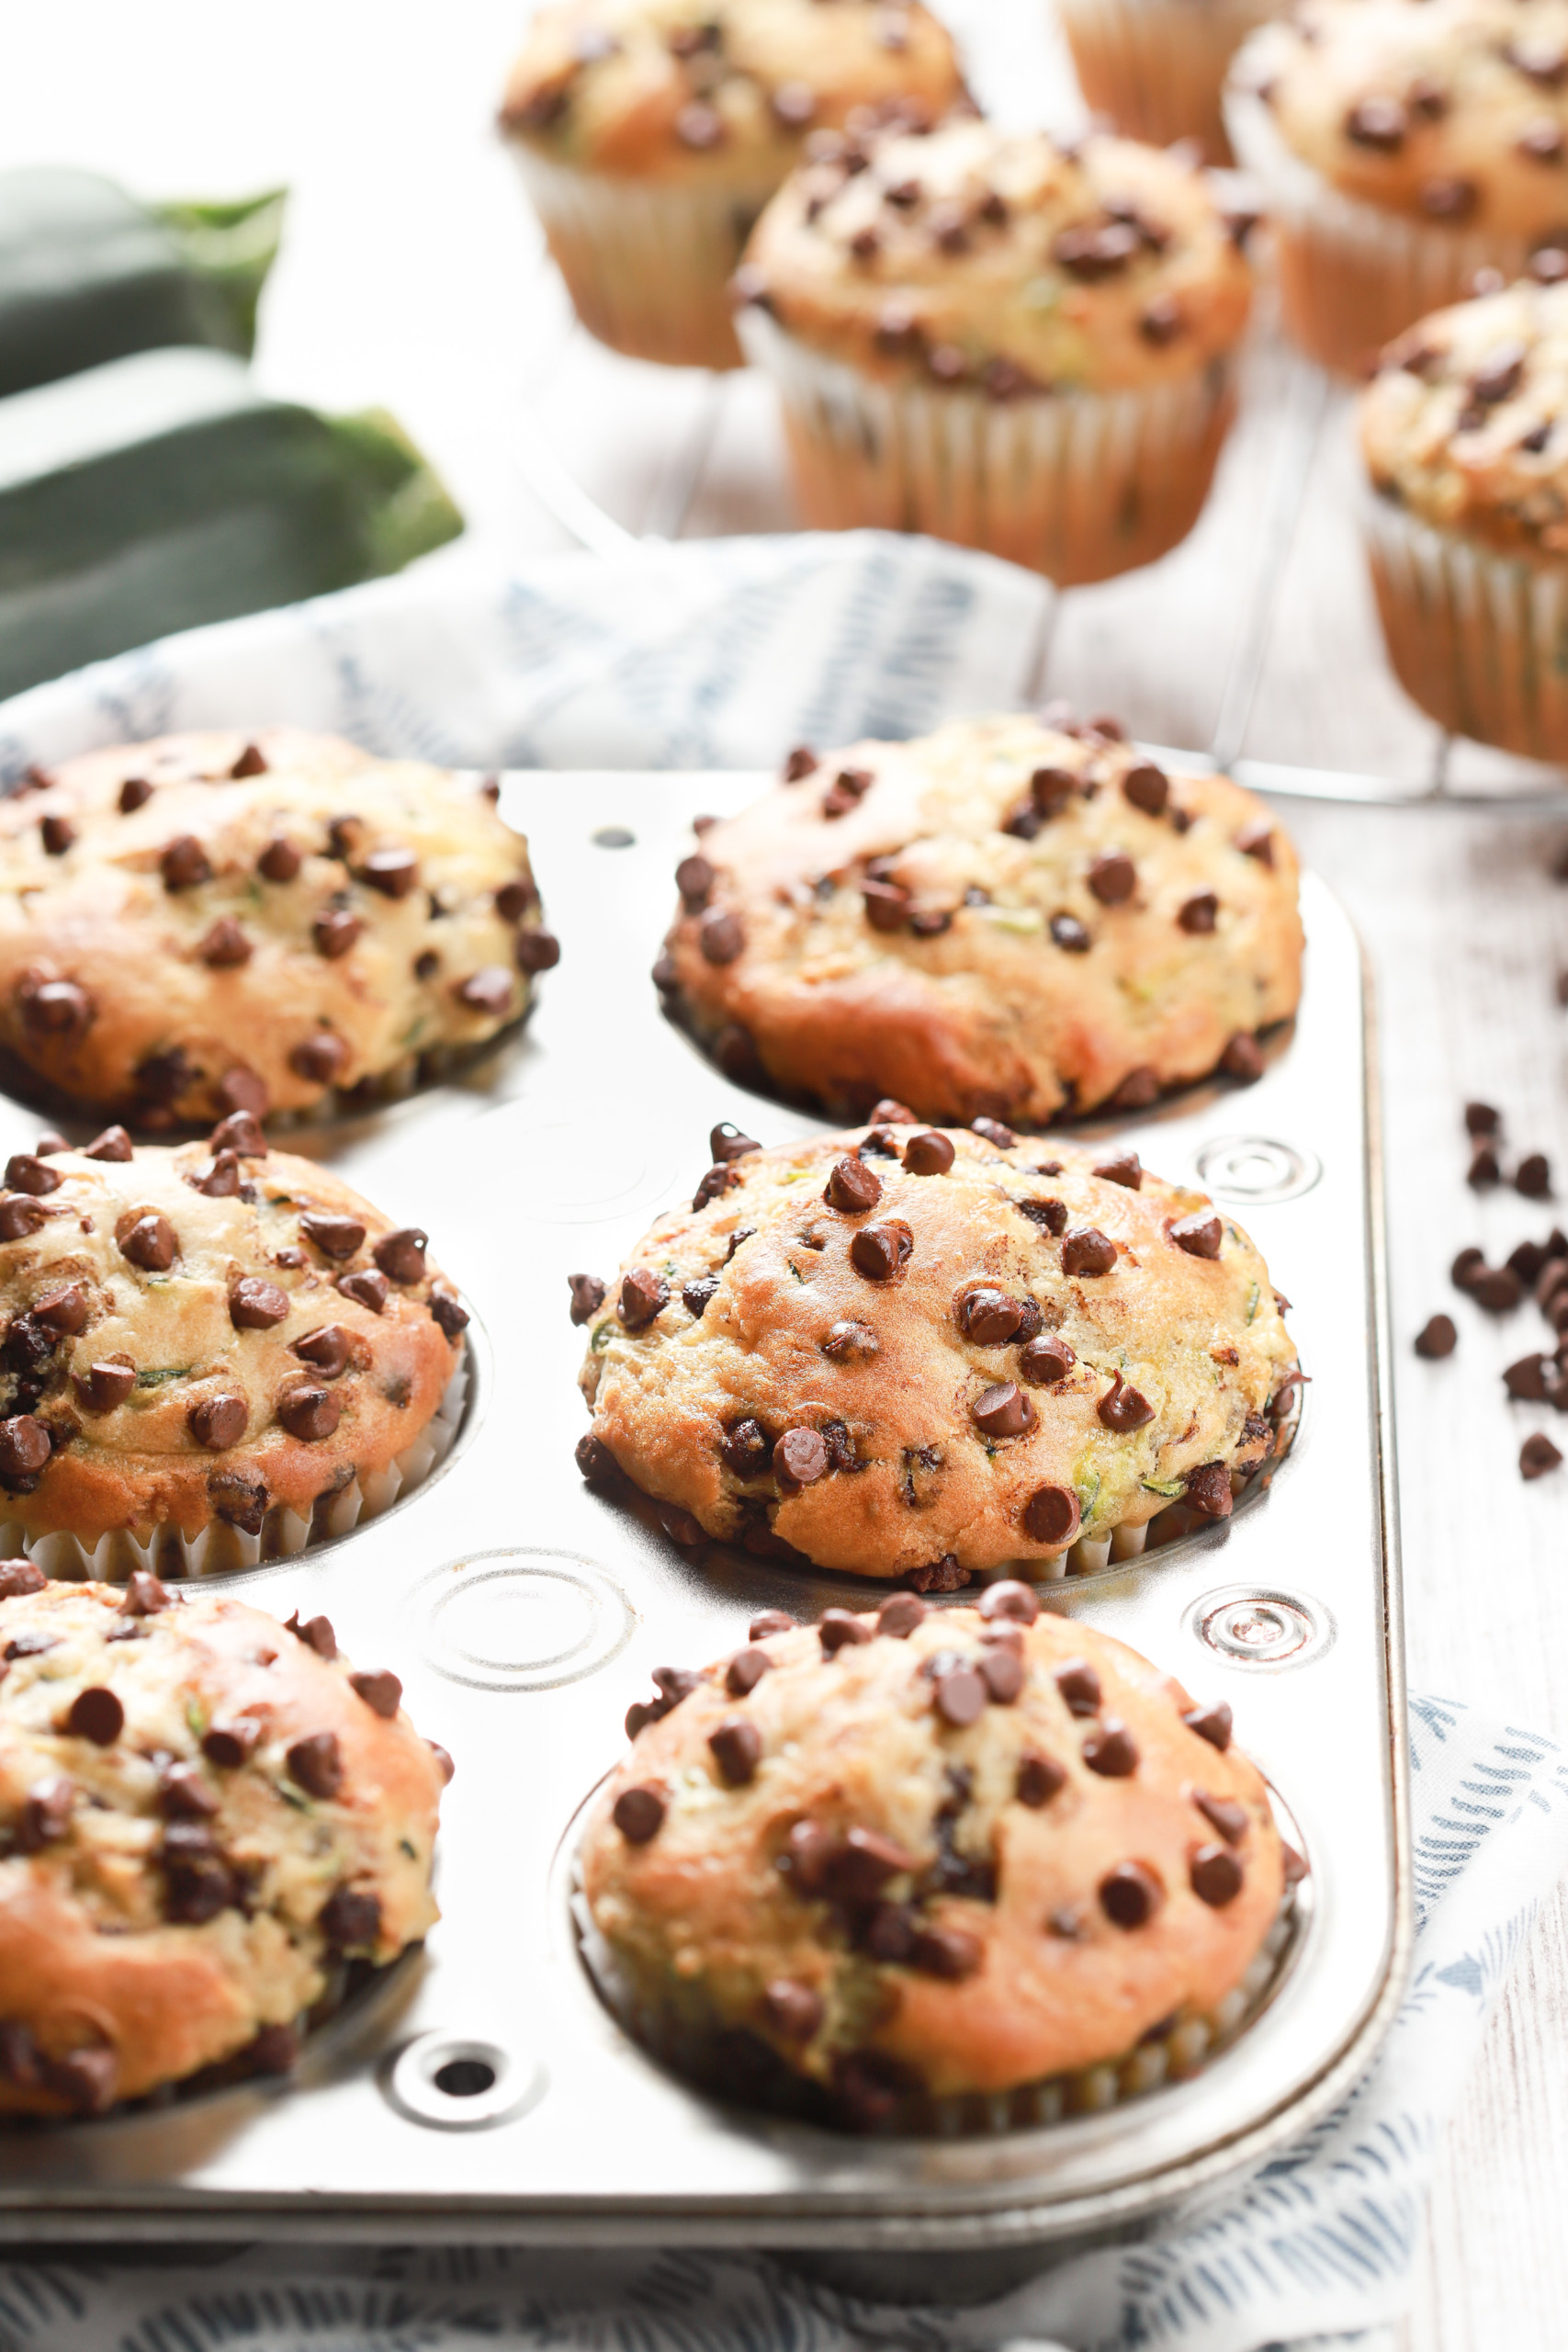 A batch of chocolate chip zucchini muffins in a muffin tin with more muffins on a cooling rack in the background.